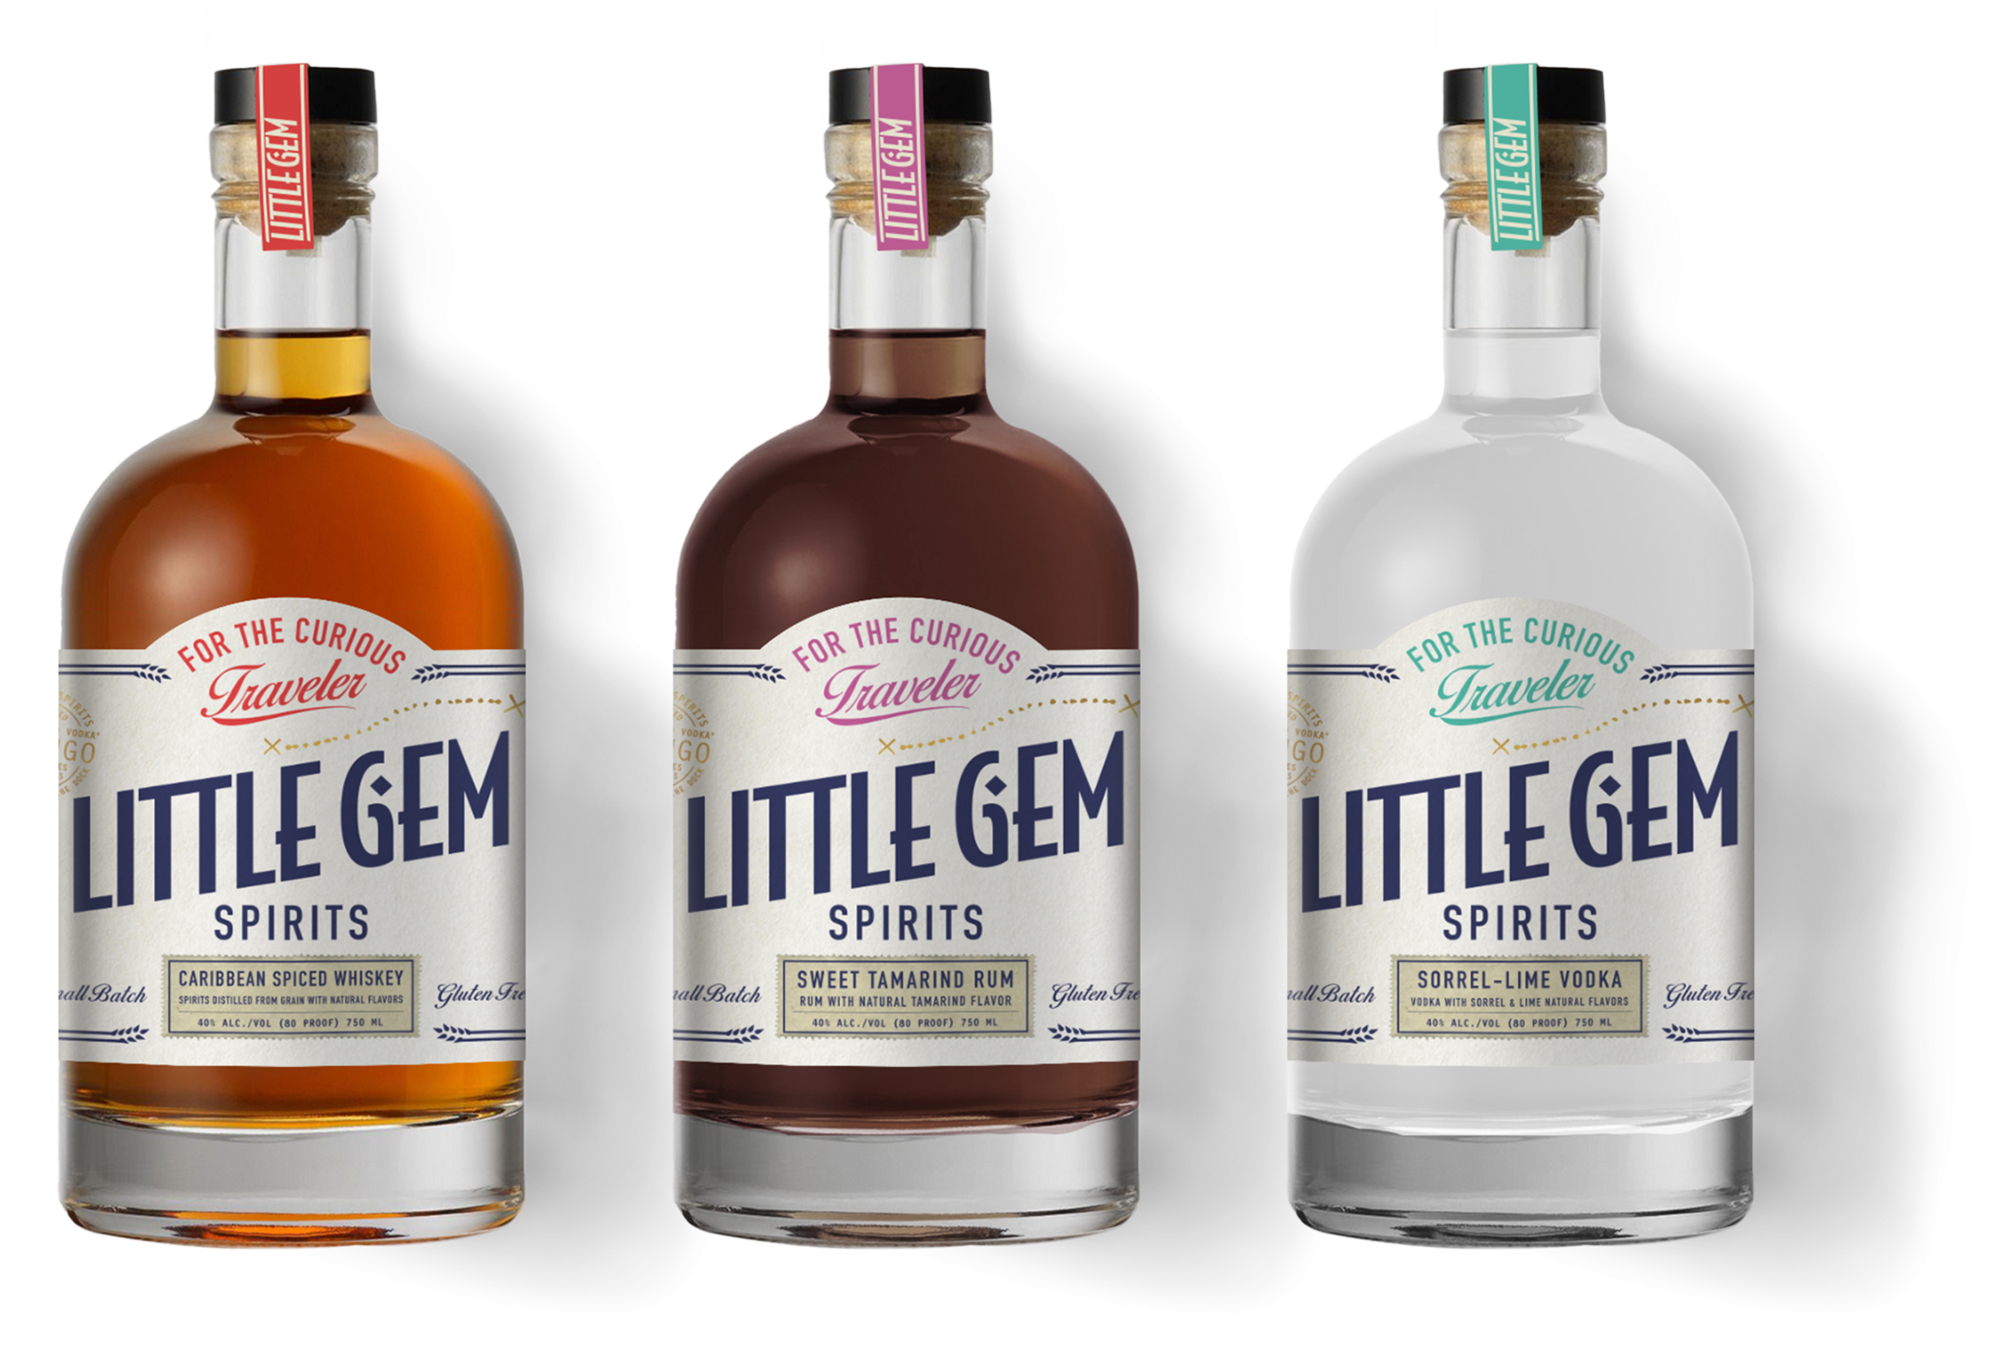 Little Gem Spirits created by Todd Manley in St Croix